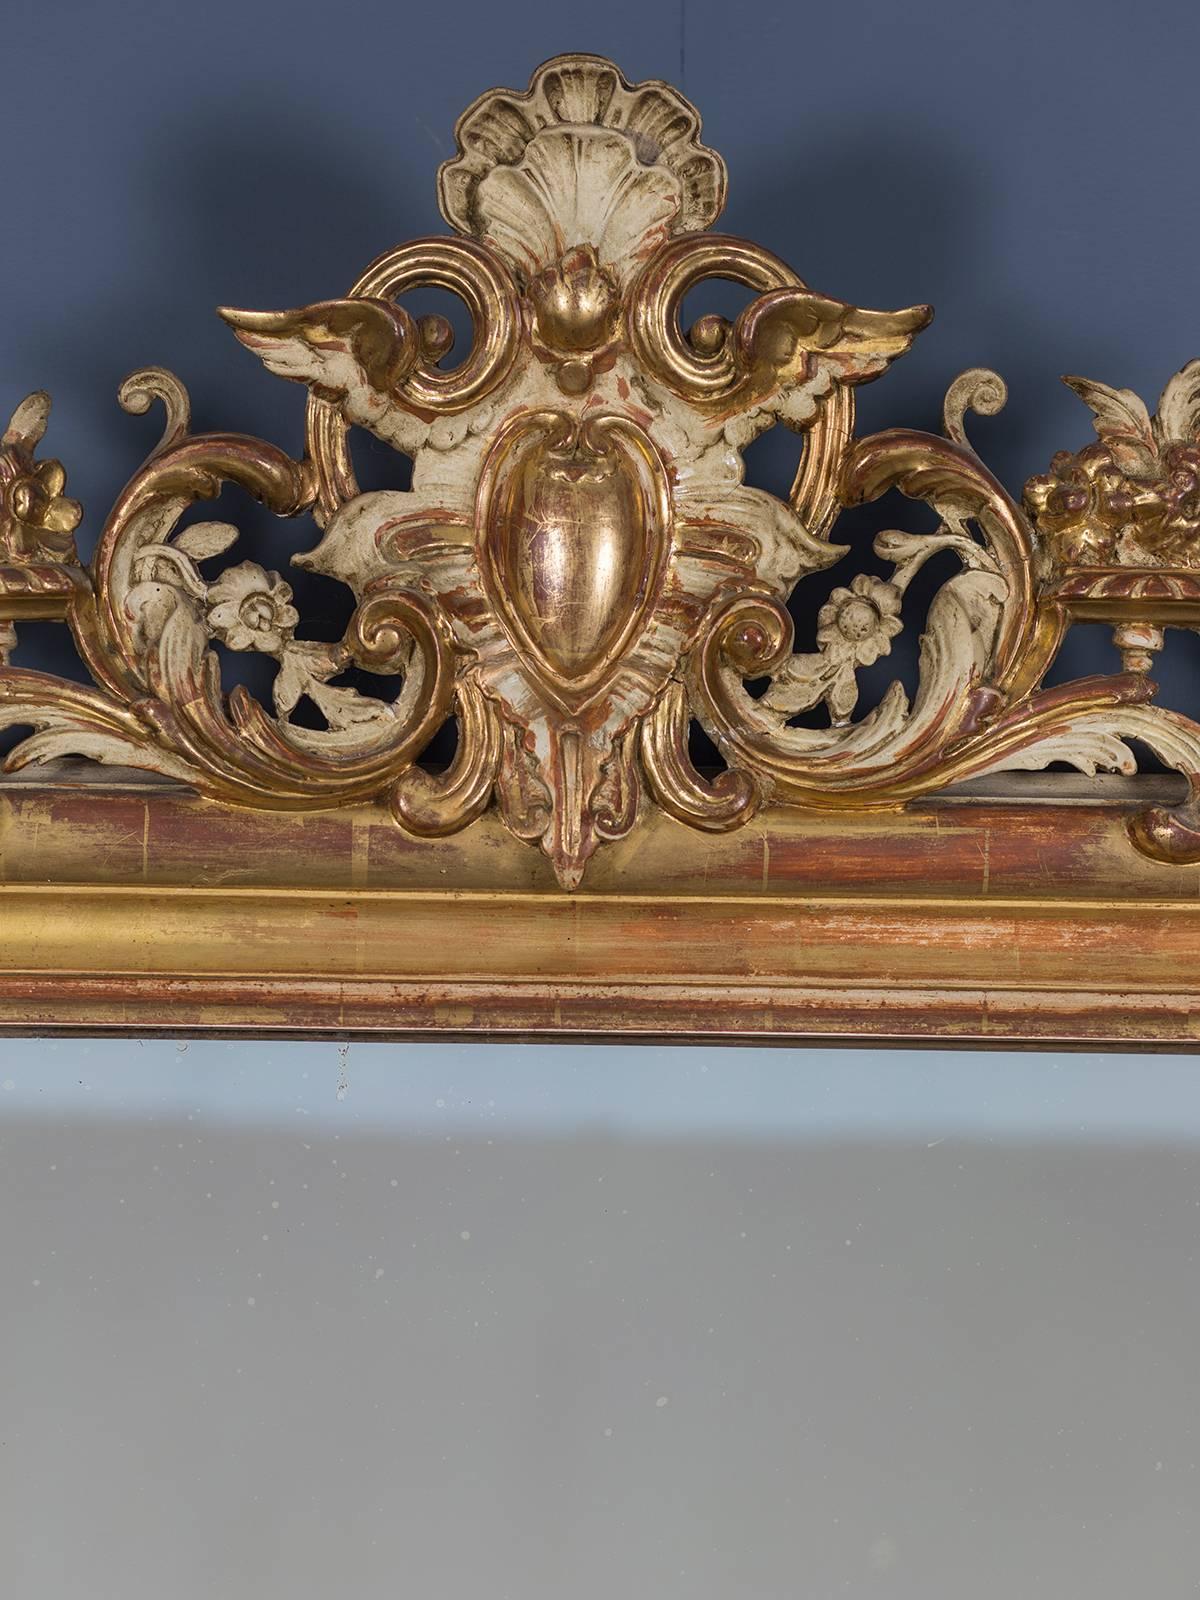 Receive our new selections direct from 1stdibs by email each week. Please click “Follow Dealer” button below and see them first!

The elegant simplicity of this antique French Louis Philippe gold leaf mirror circa 1880 is accentuated by the